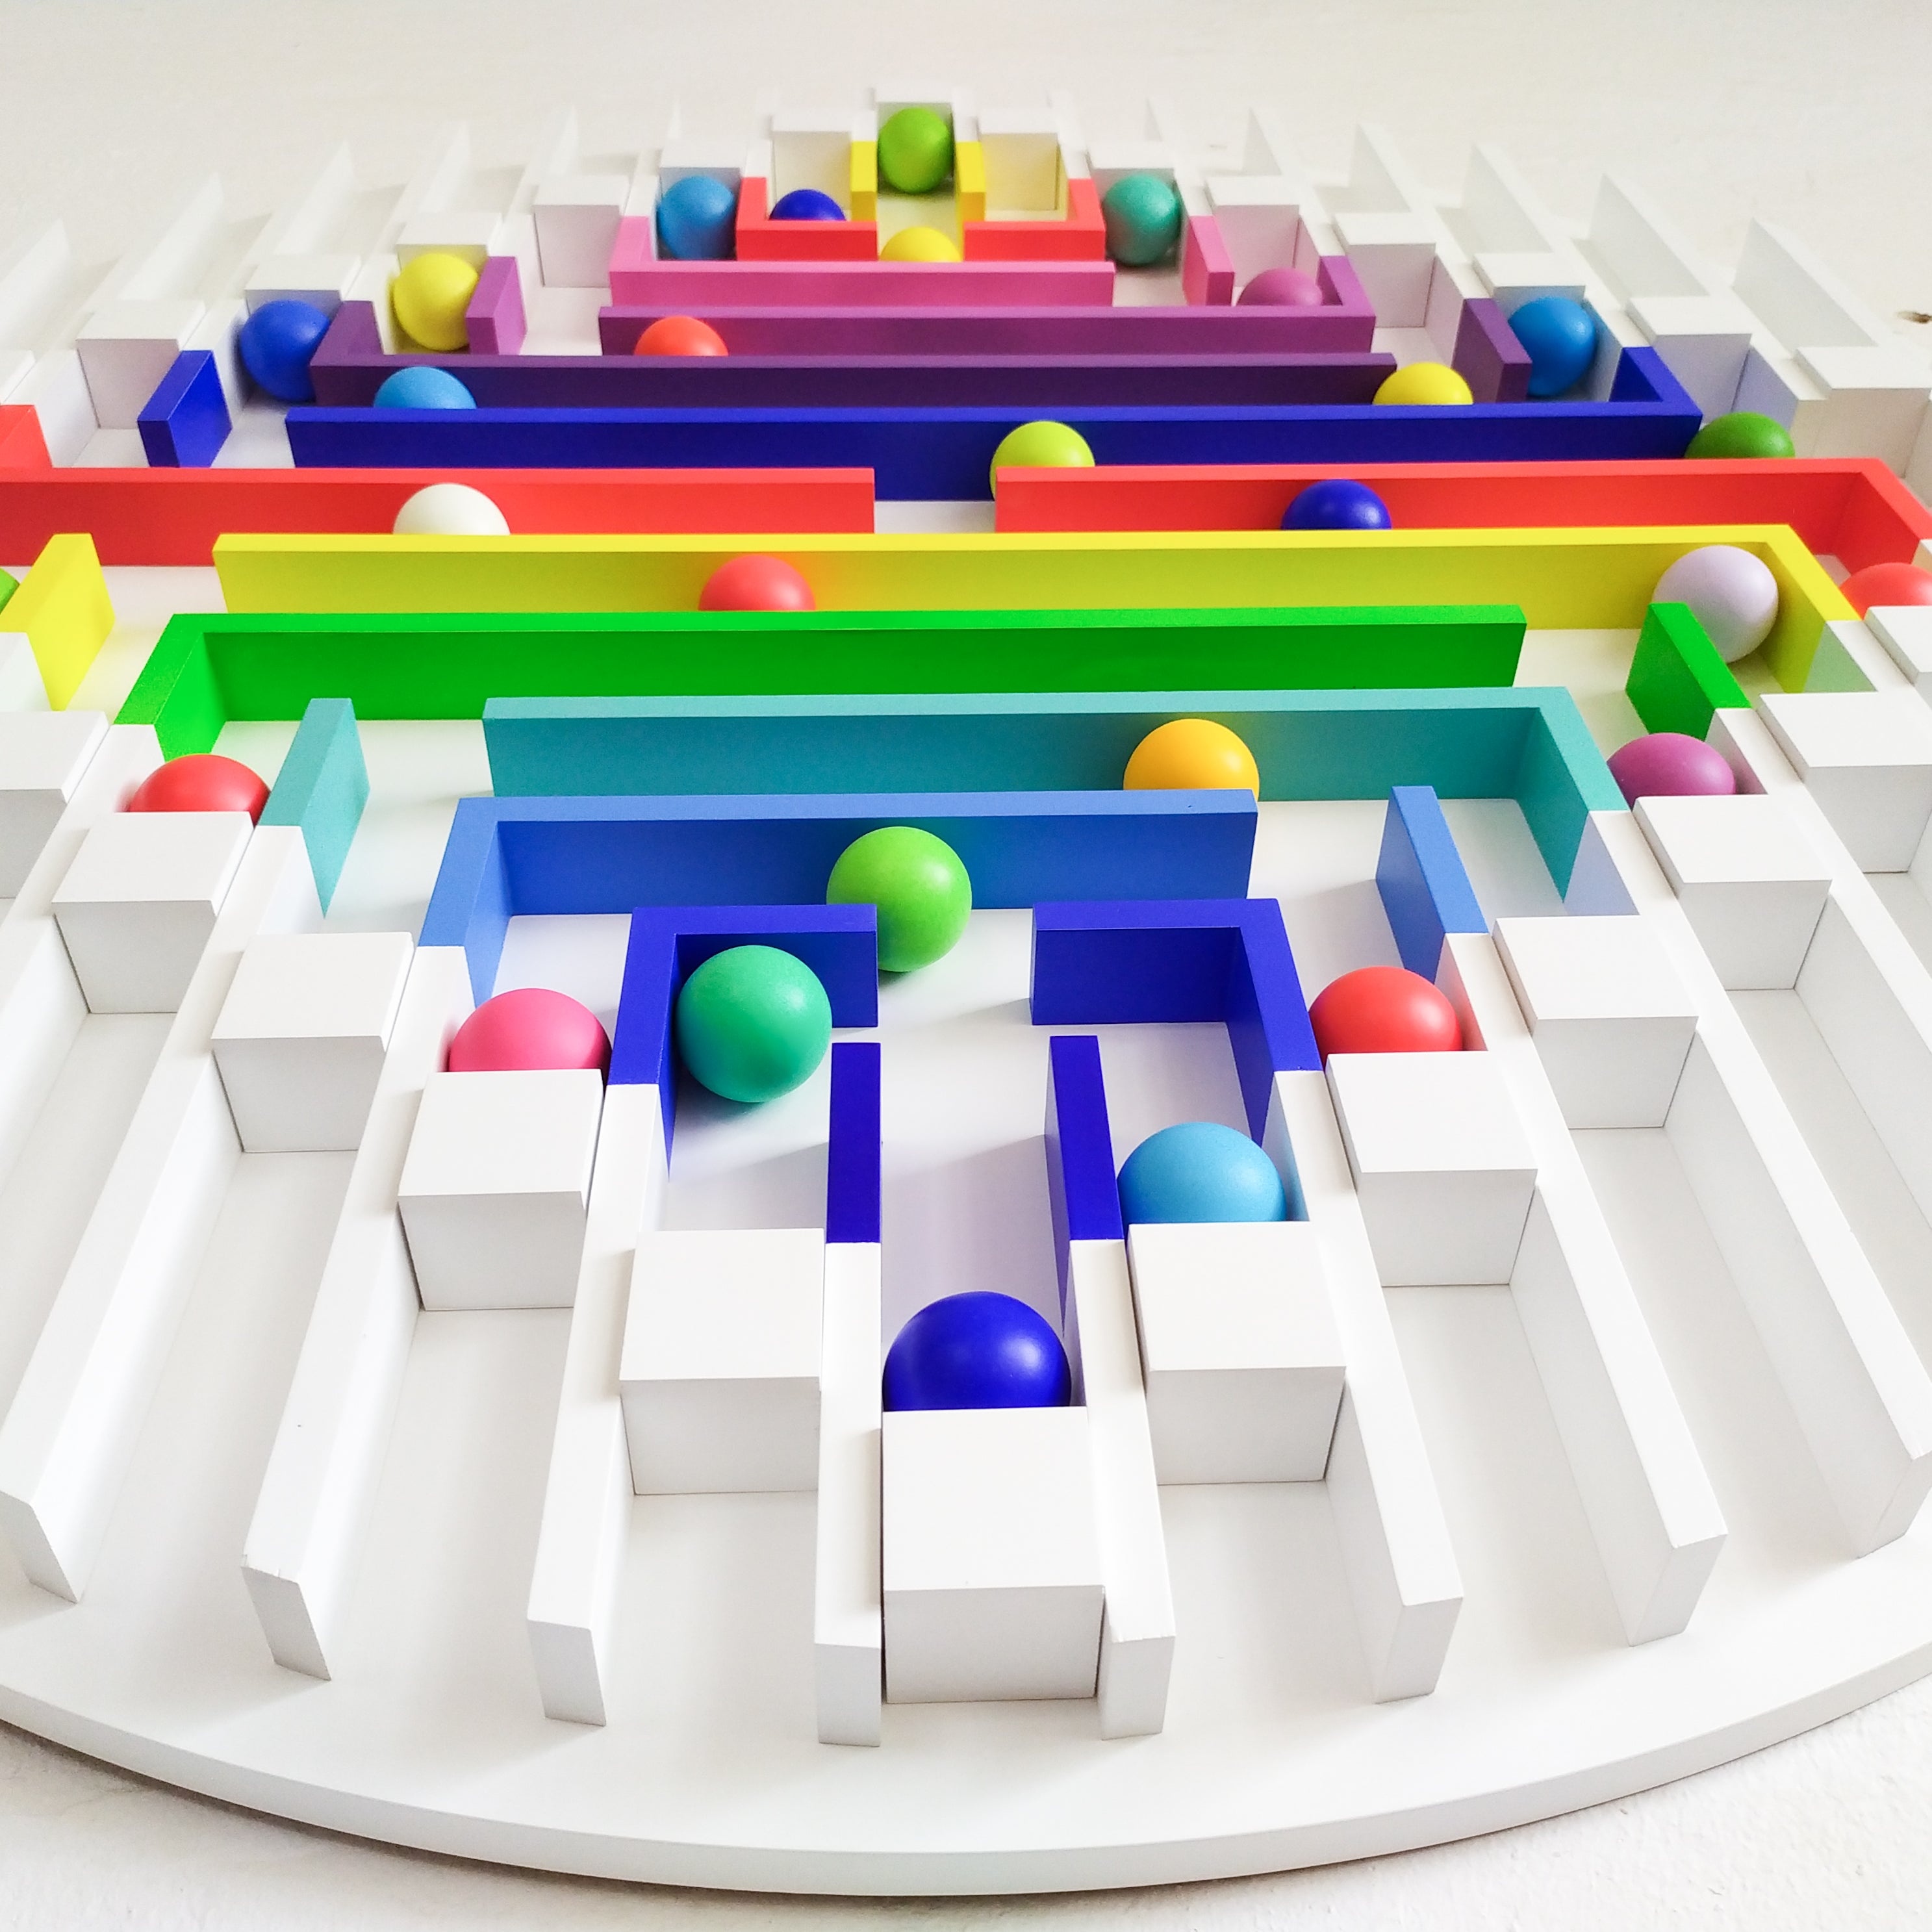 'COLORFUL LABYRINTHS IN CIRCLE SCULPTURE'